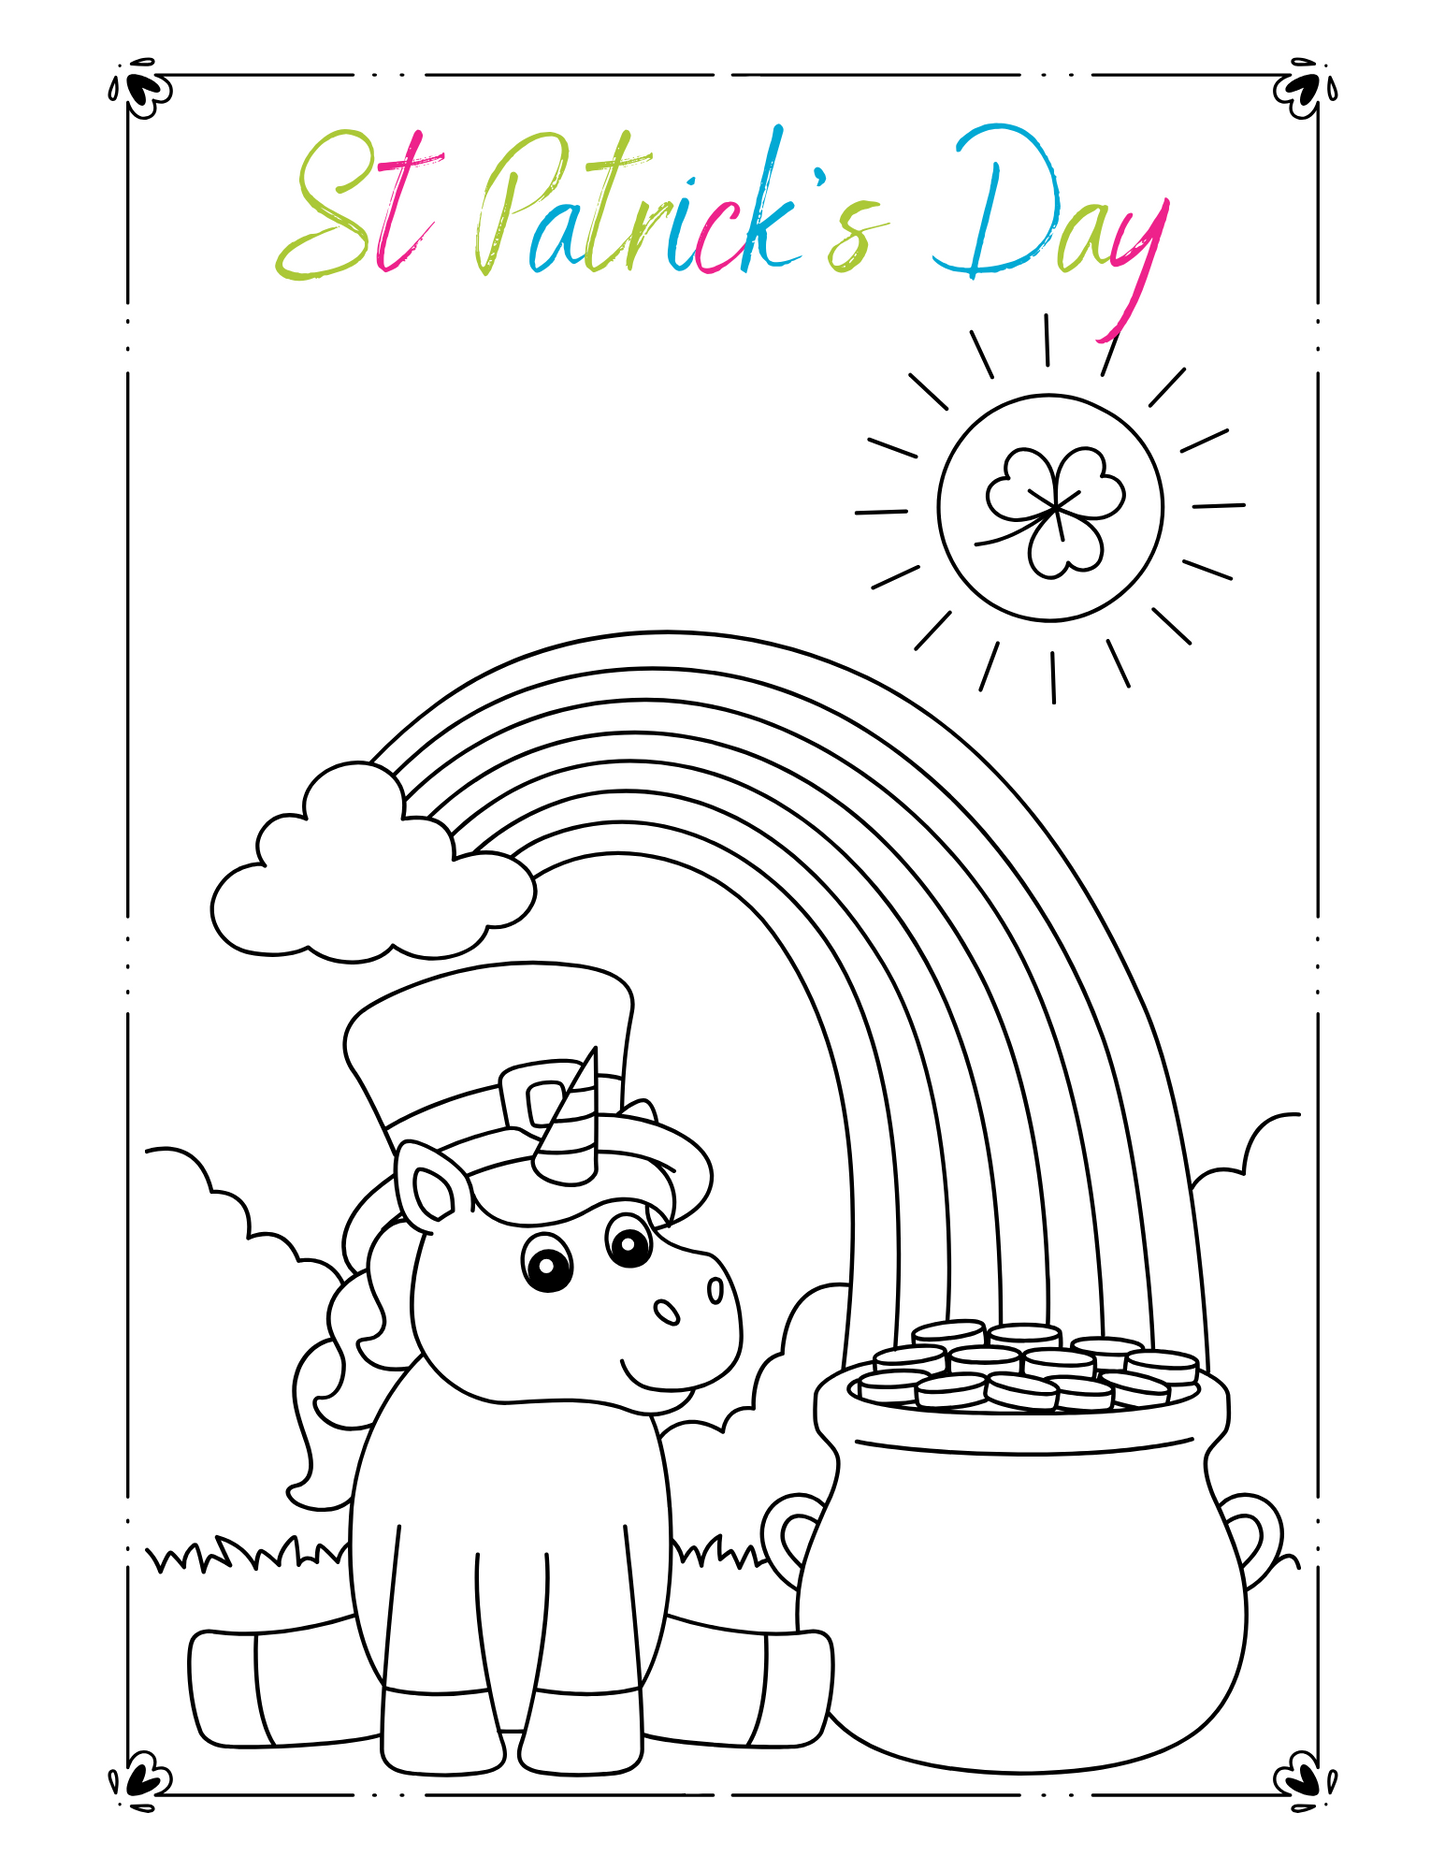 St Patrick's Day Coloring Pages Digital Download